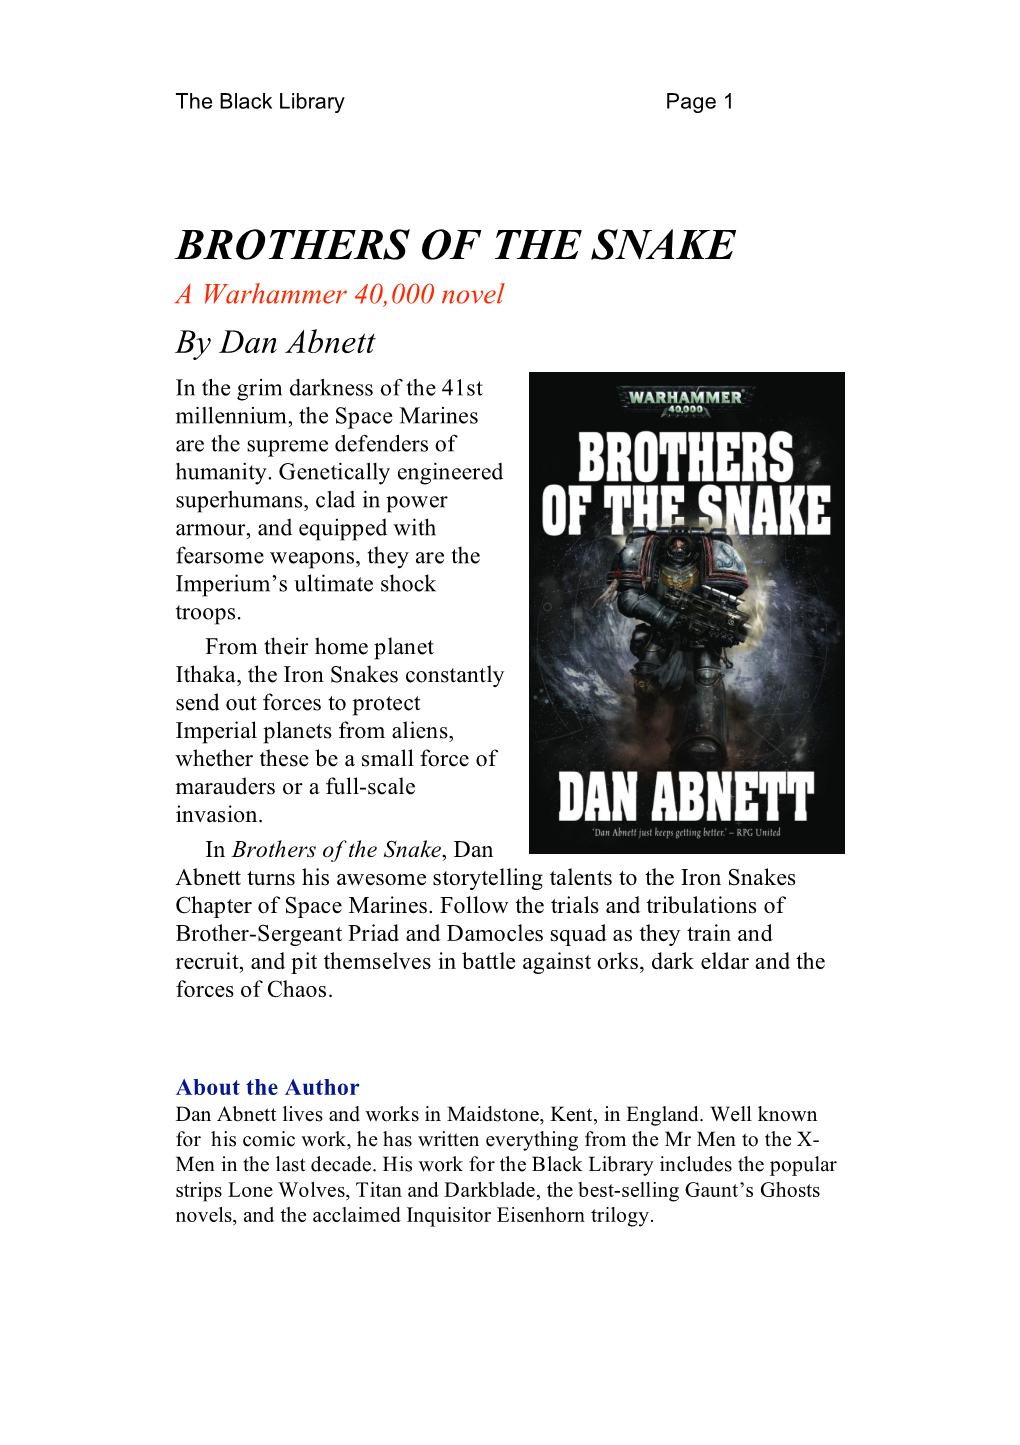 BROTHERS of the SNAKE a Warhammer 40,000 Novel by Dan Abnett in the Grim Darkness of the 41St Millennium, the Space Marines Are the Supreme Defenders of Humanity